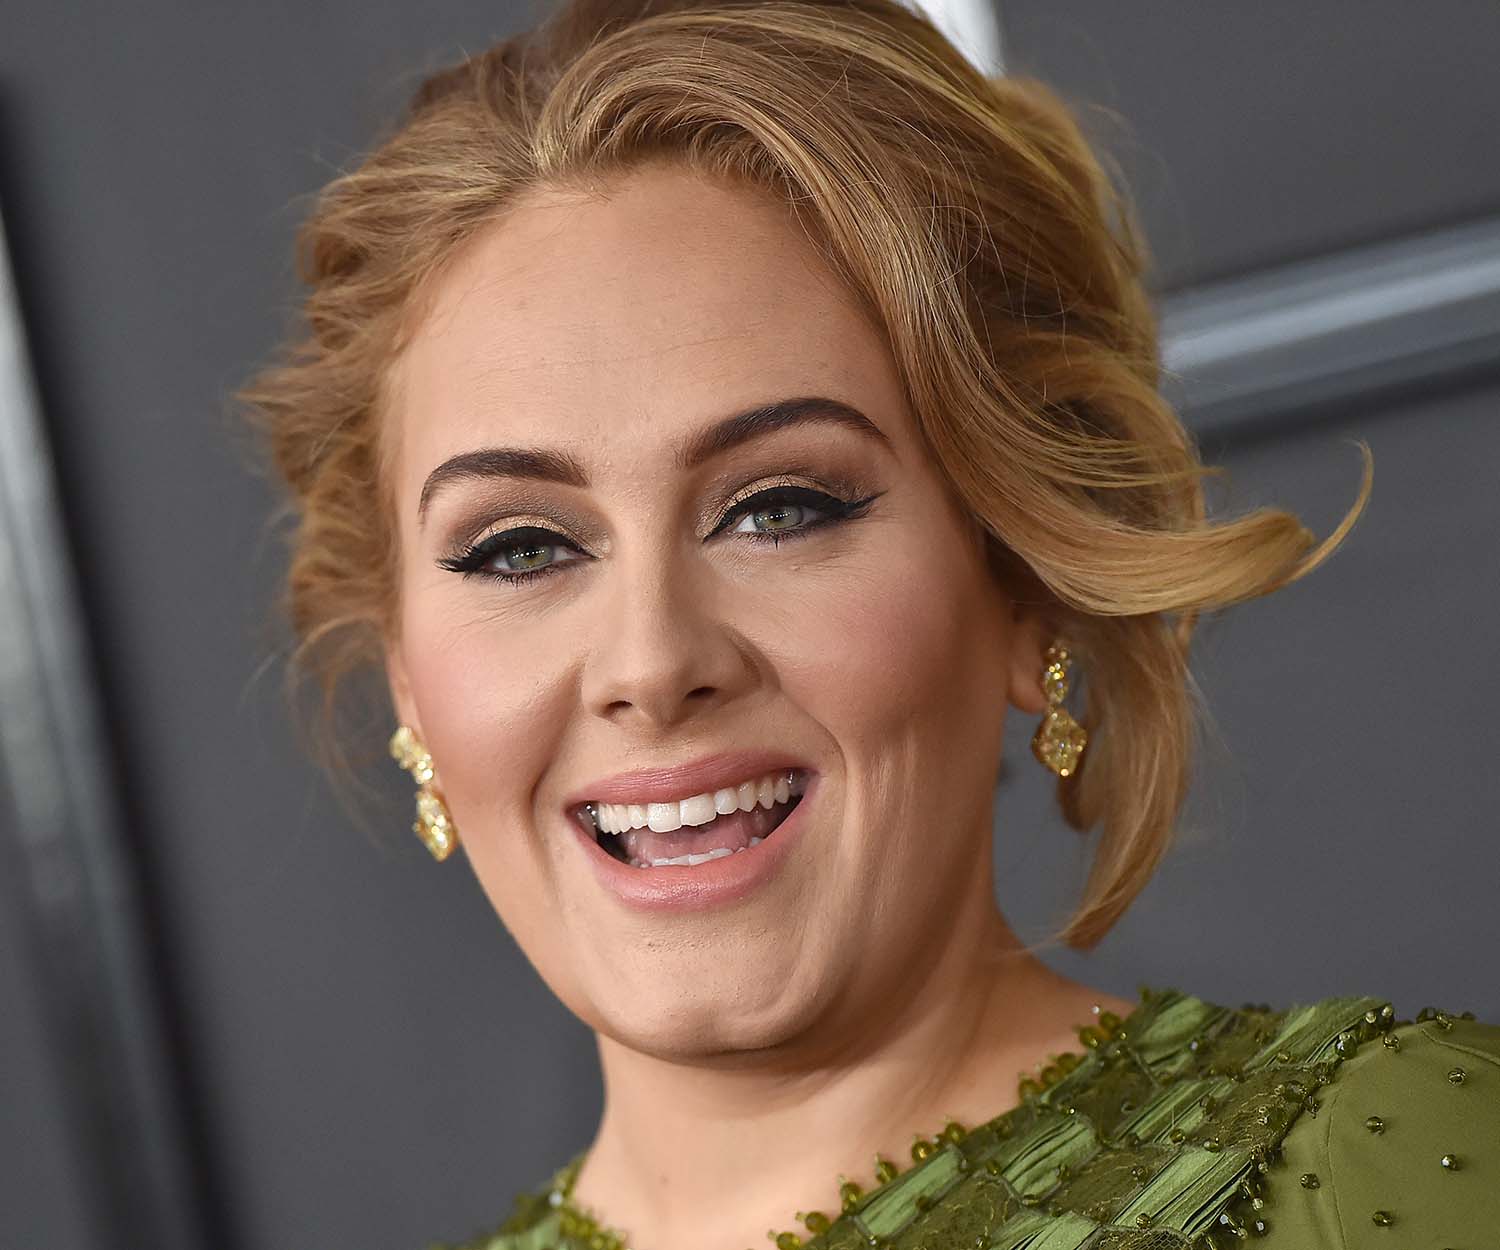 ‘I used to cry but now I sweat’: Adele shows off her incredible weight loss